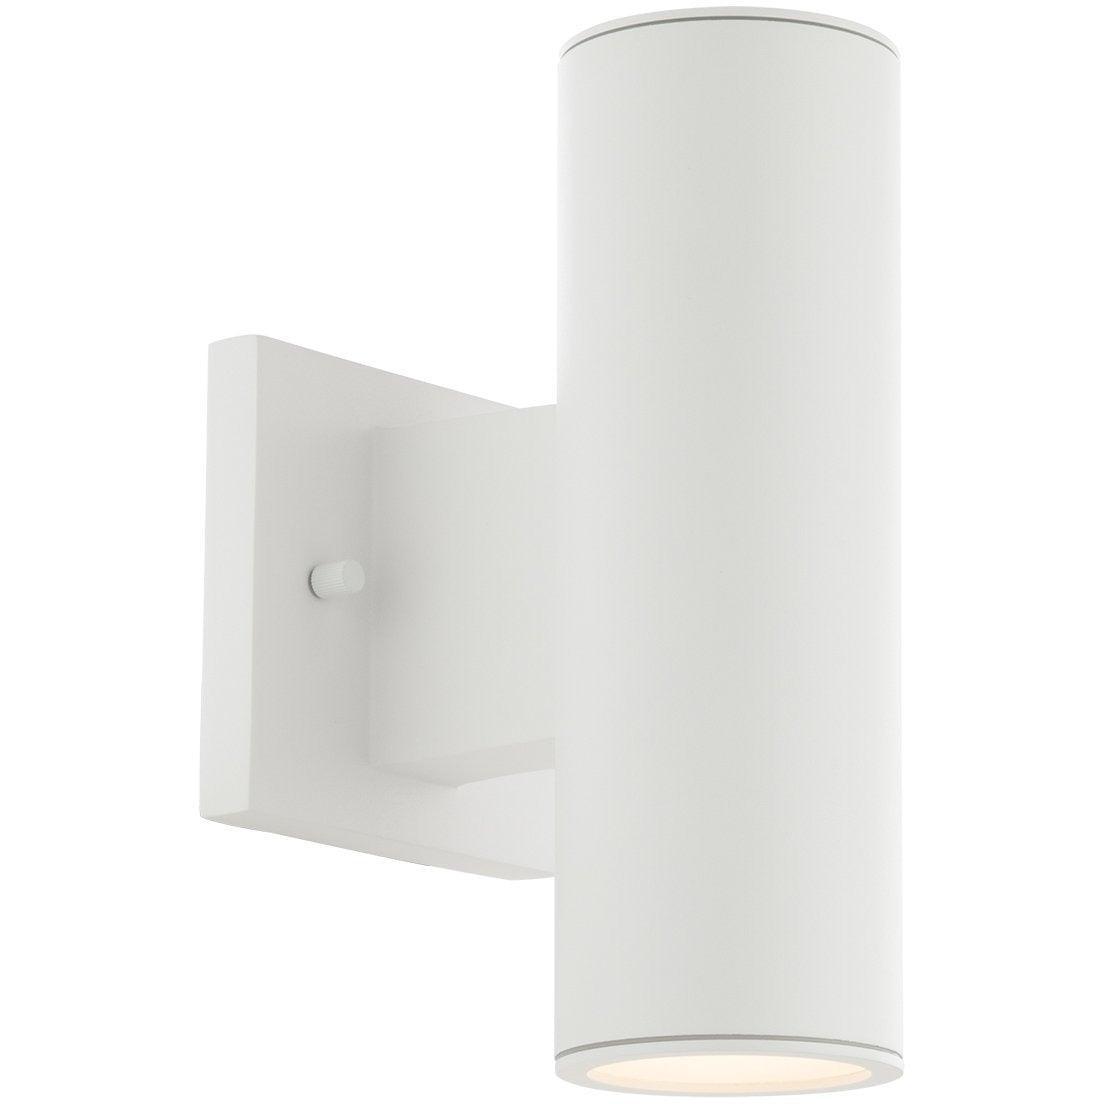 WAC Lighting - Cylinder LED Outdoor Wall Light - WS-W190212-30-WT | Montreal Lighting & Hardware